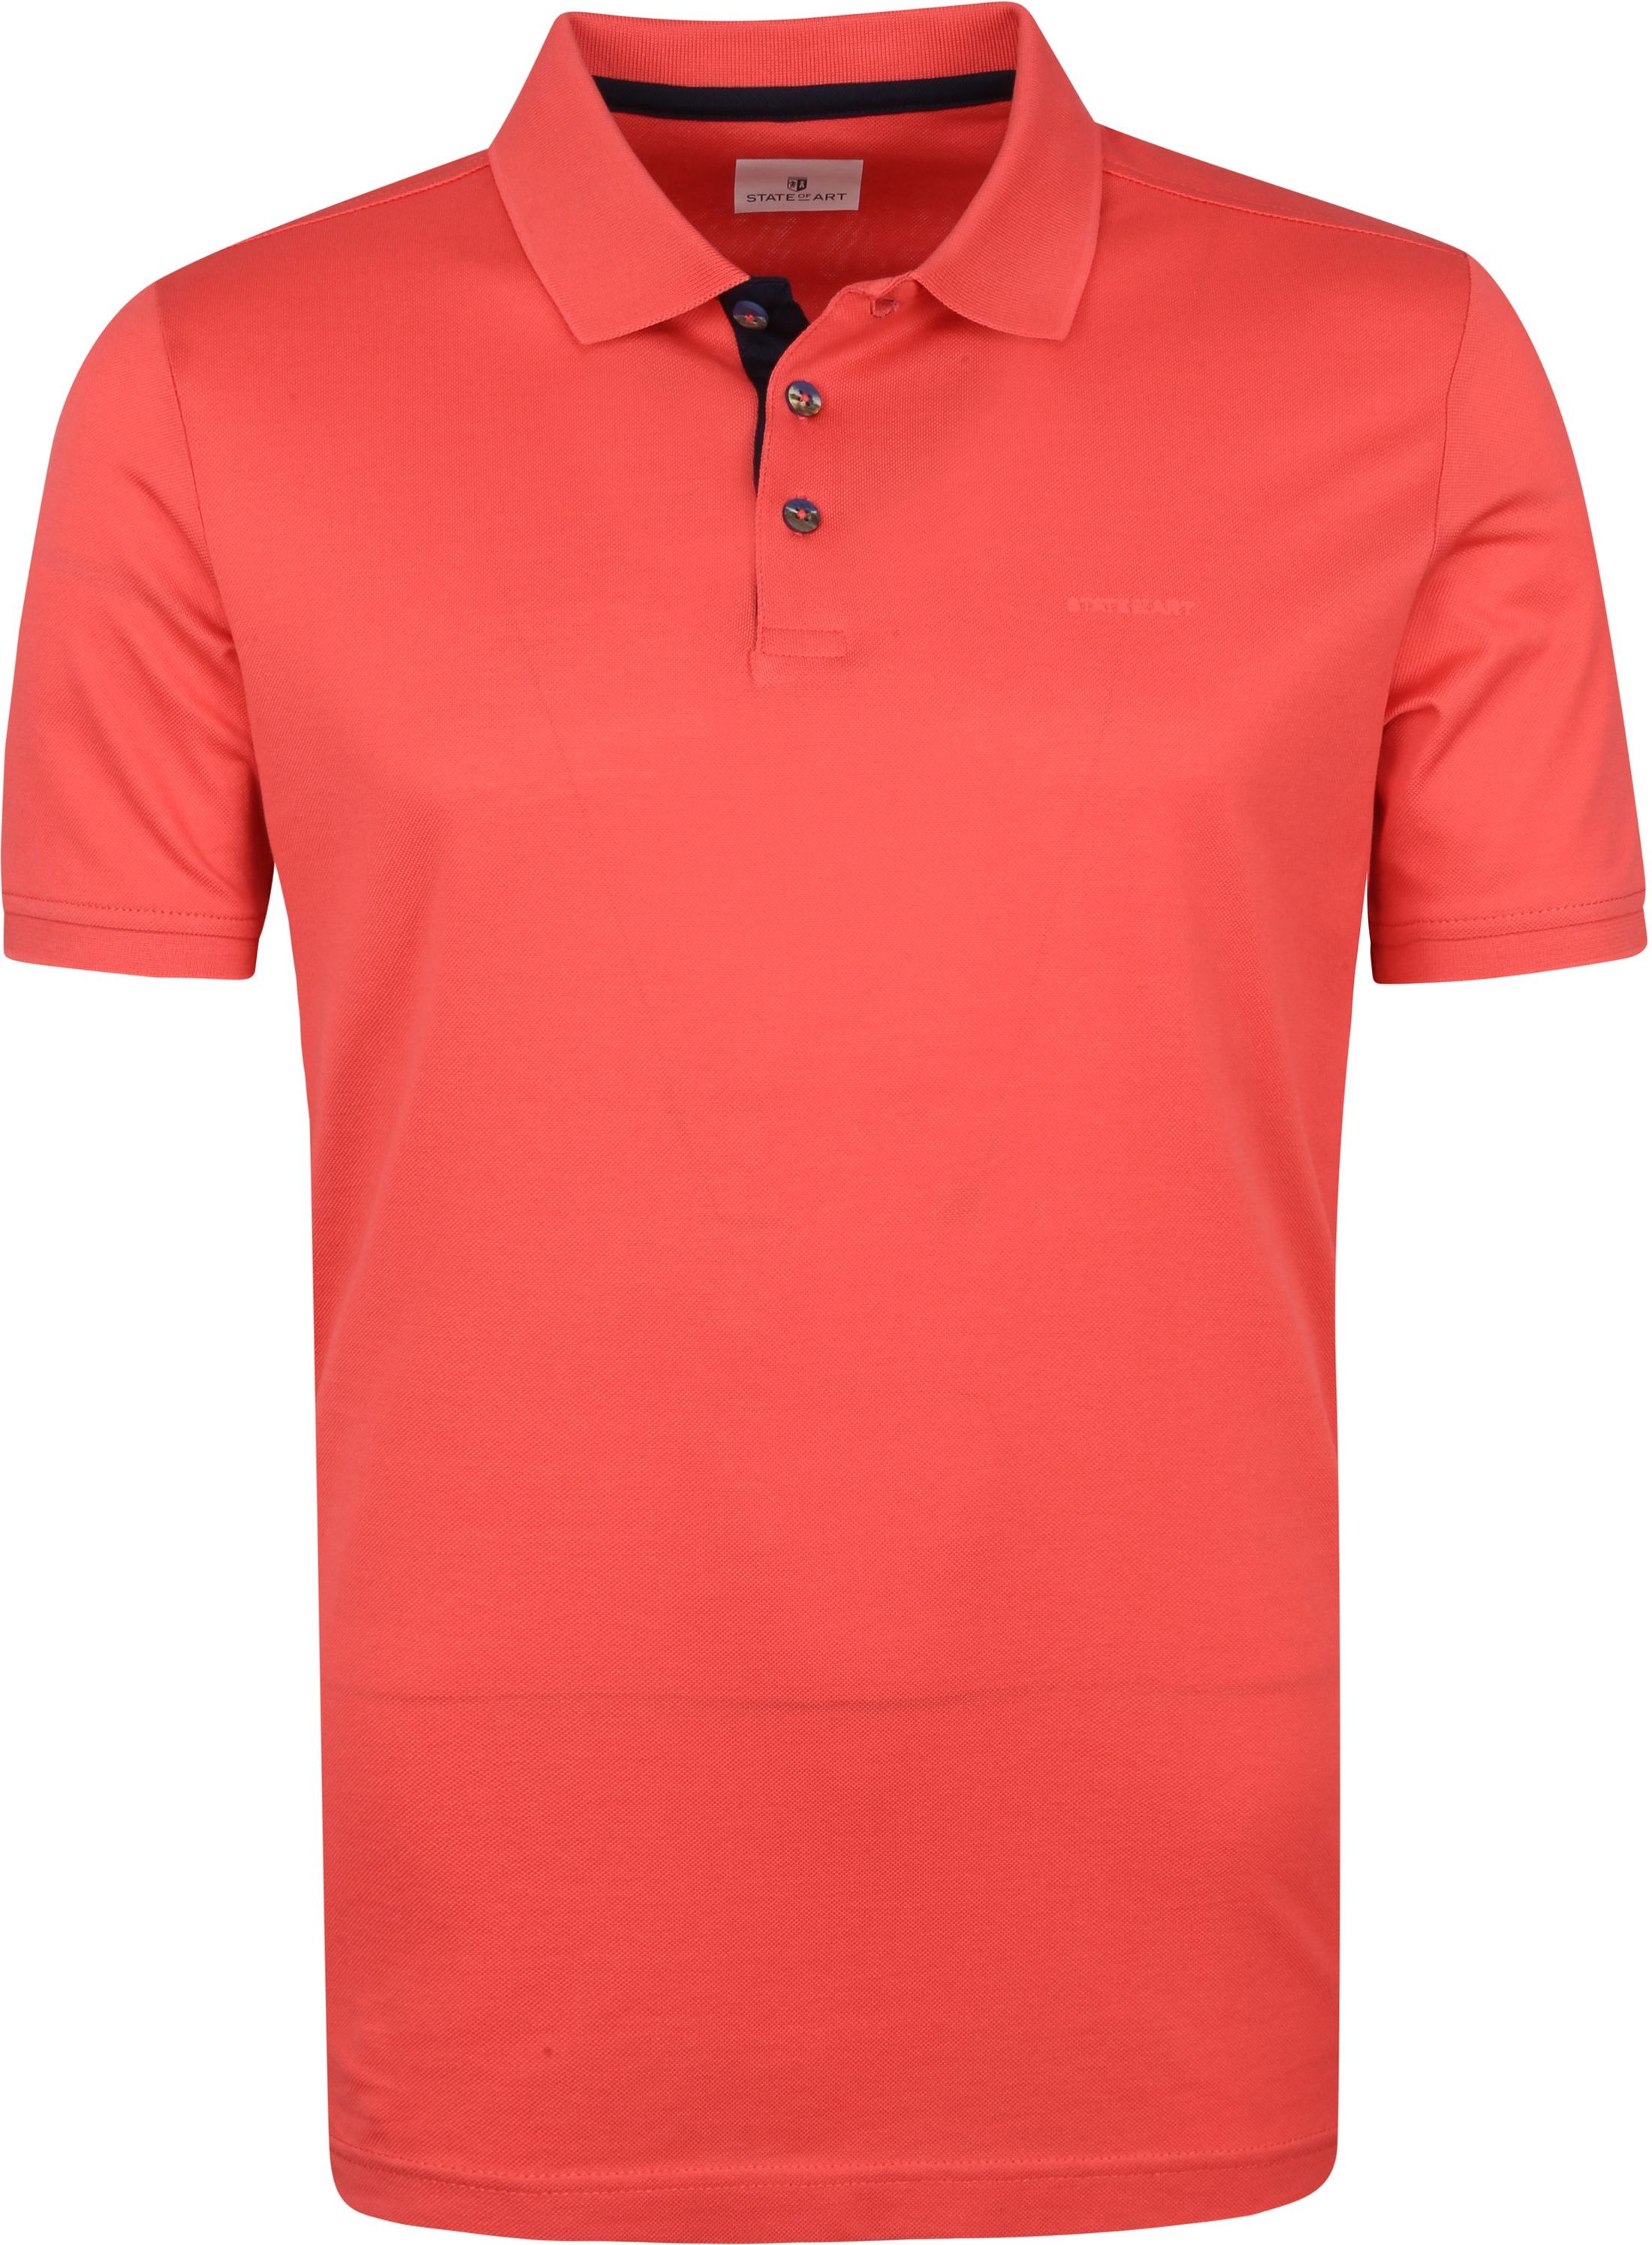 State Of Art Mercerized Pique Polo Shirt Coral Red size 3XL